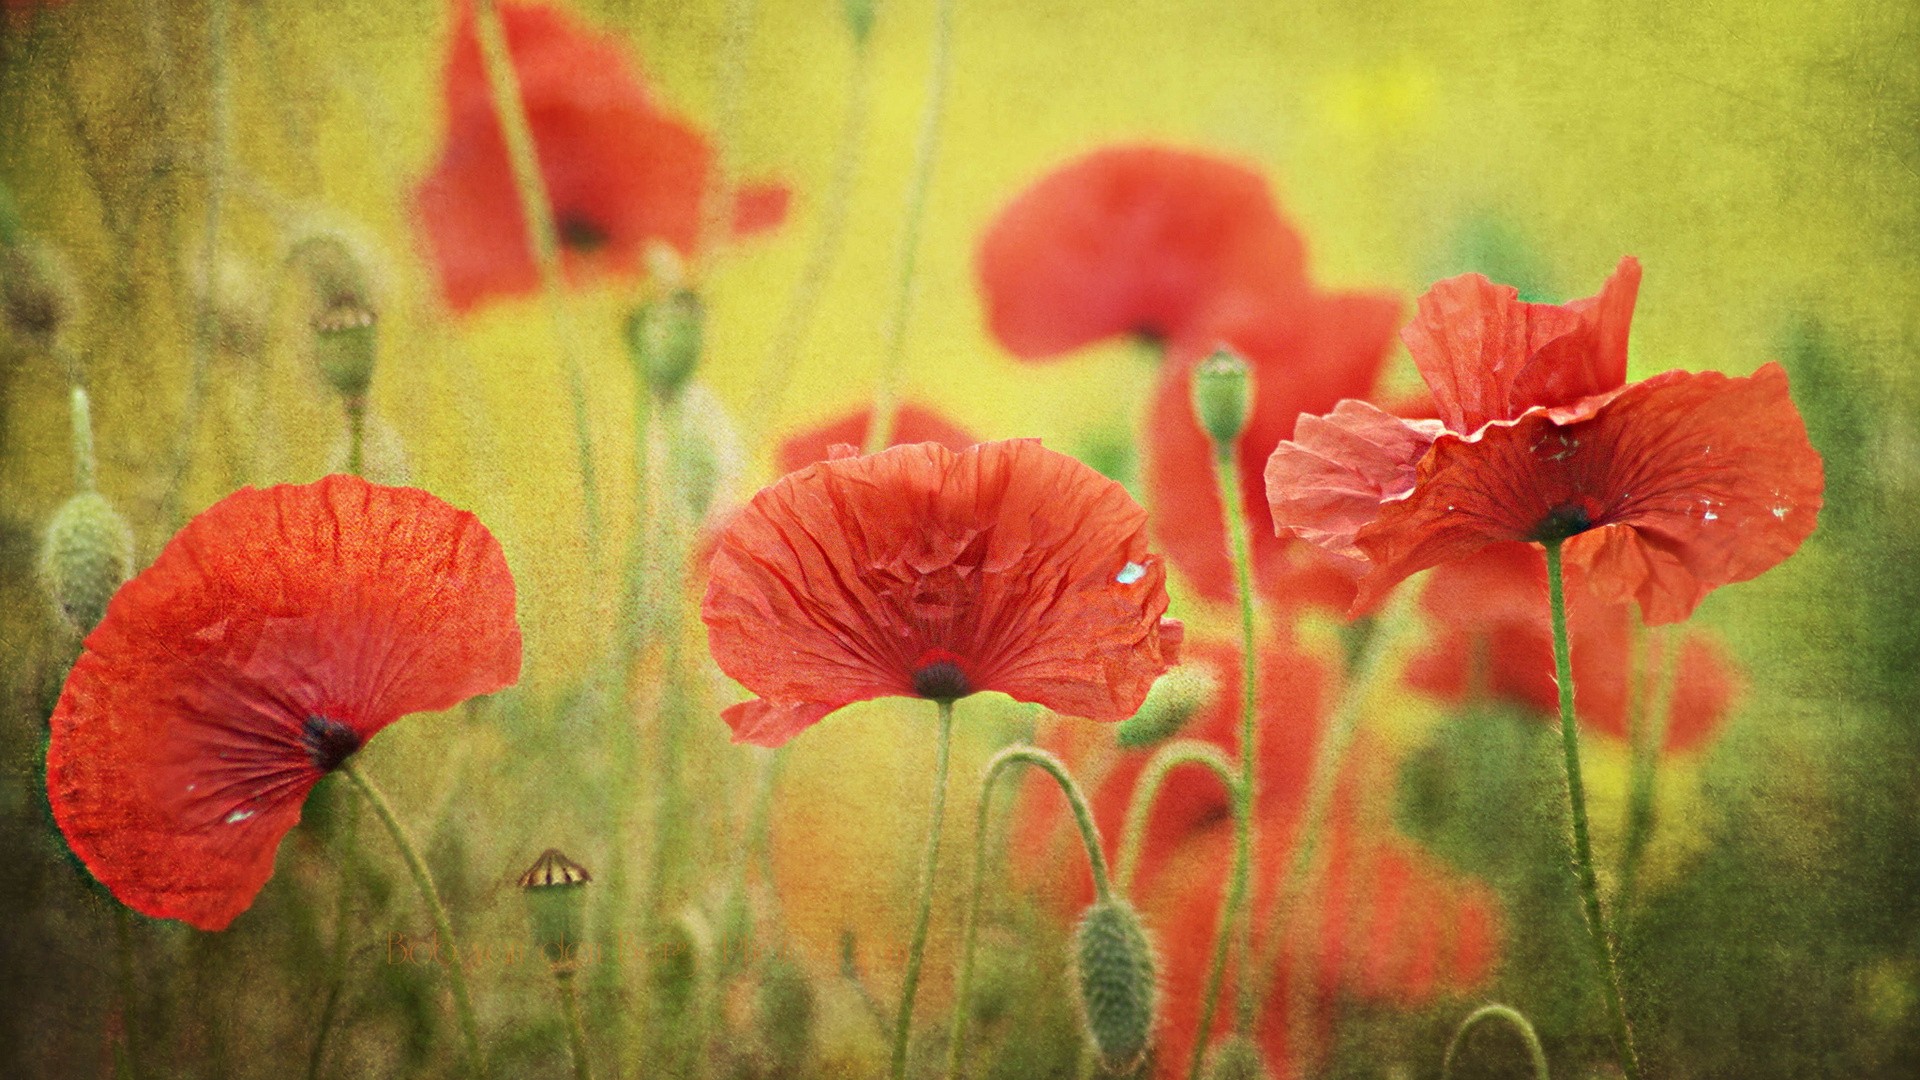 General 1920x1080 flowers poppies nature red flowers plants